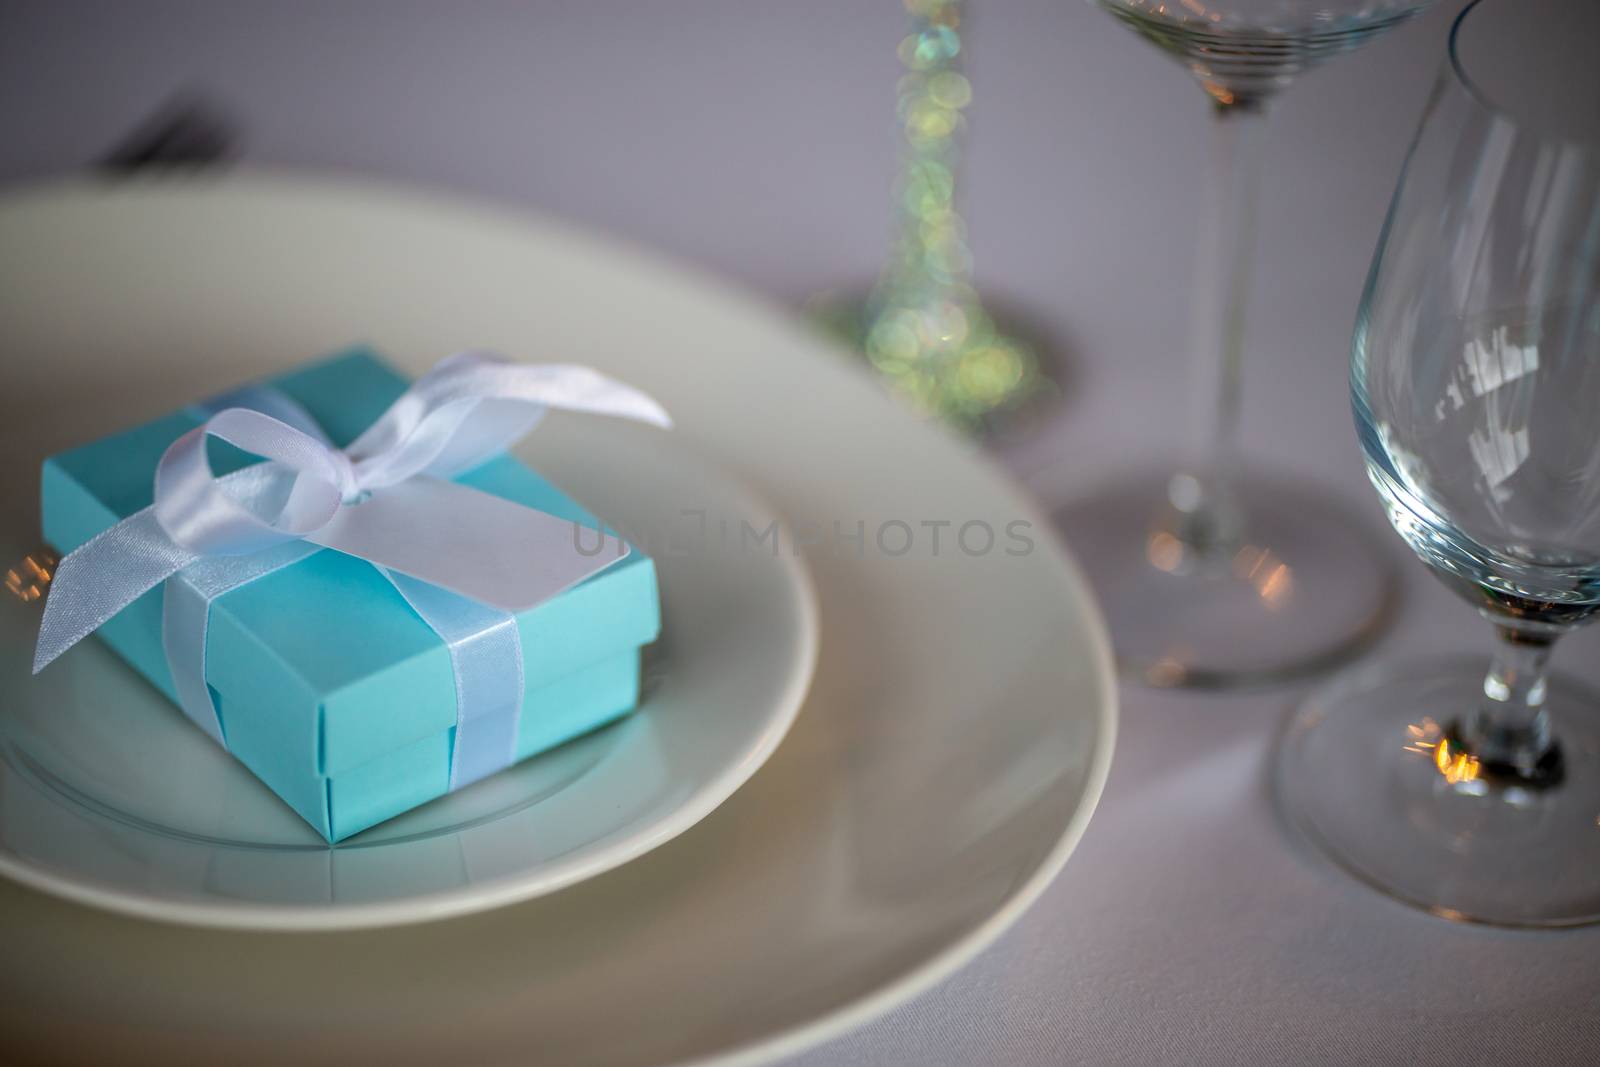 Light blue gift box on the plate by fotorobs